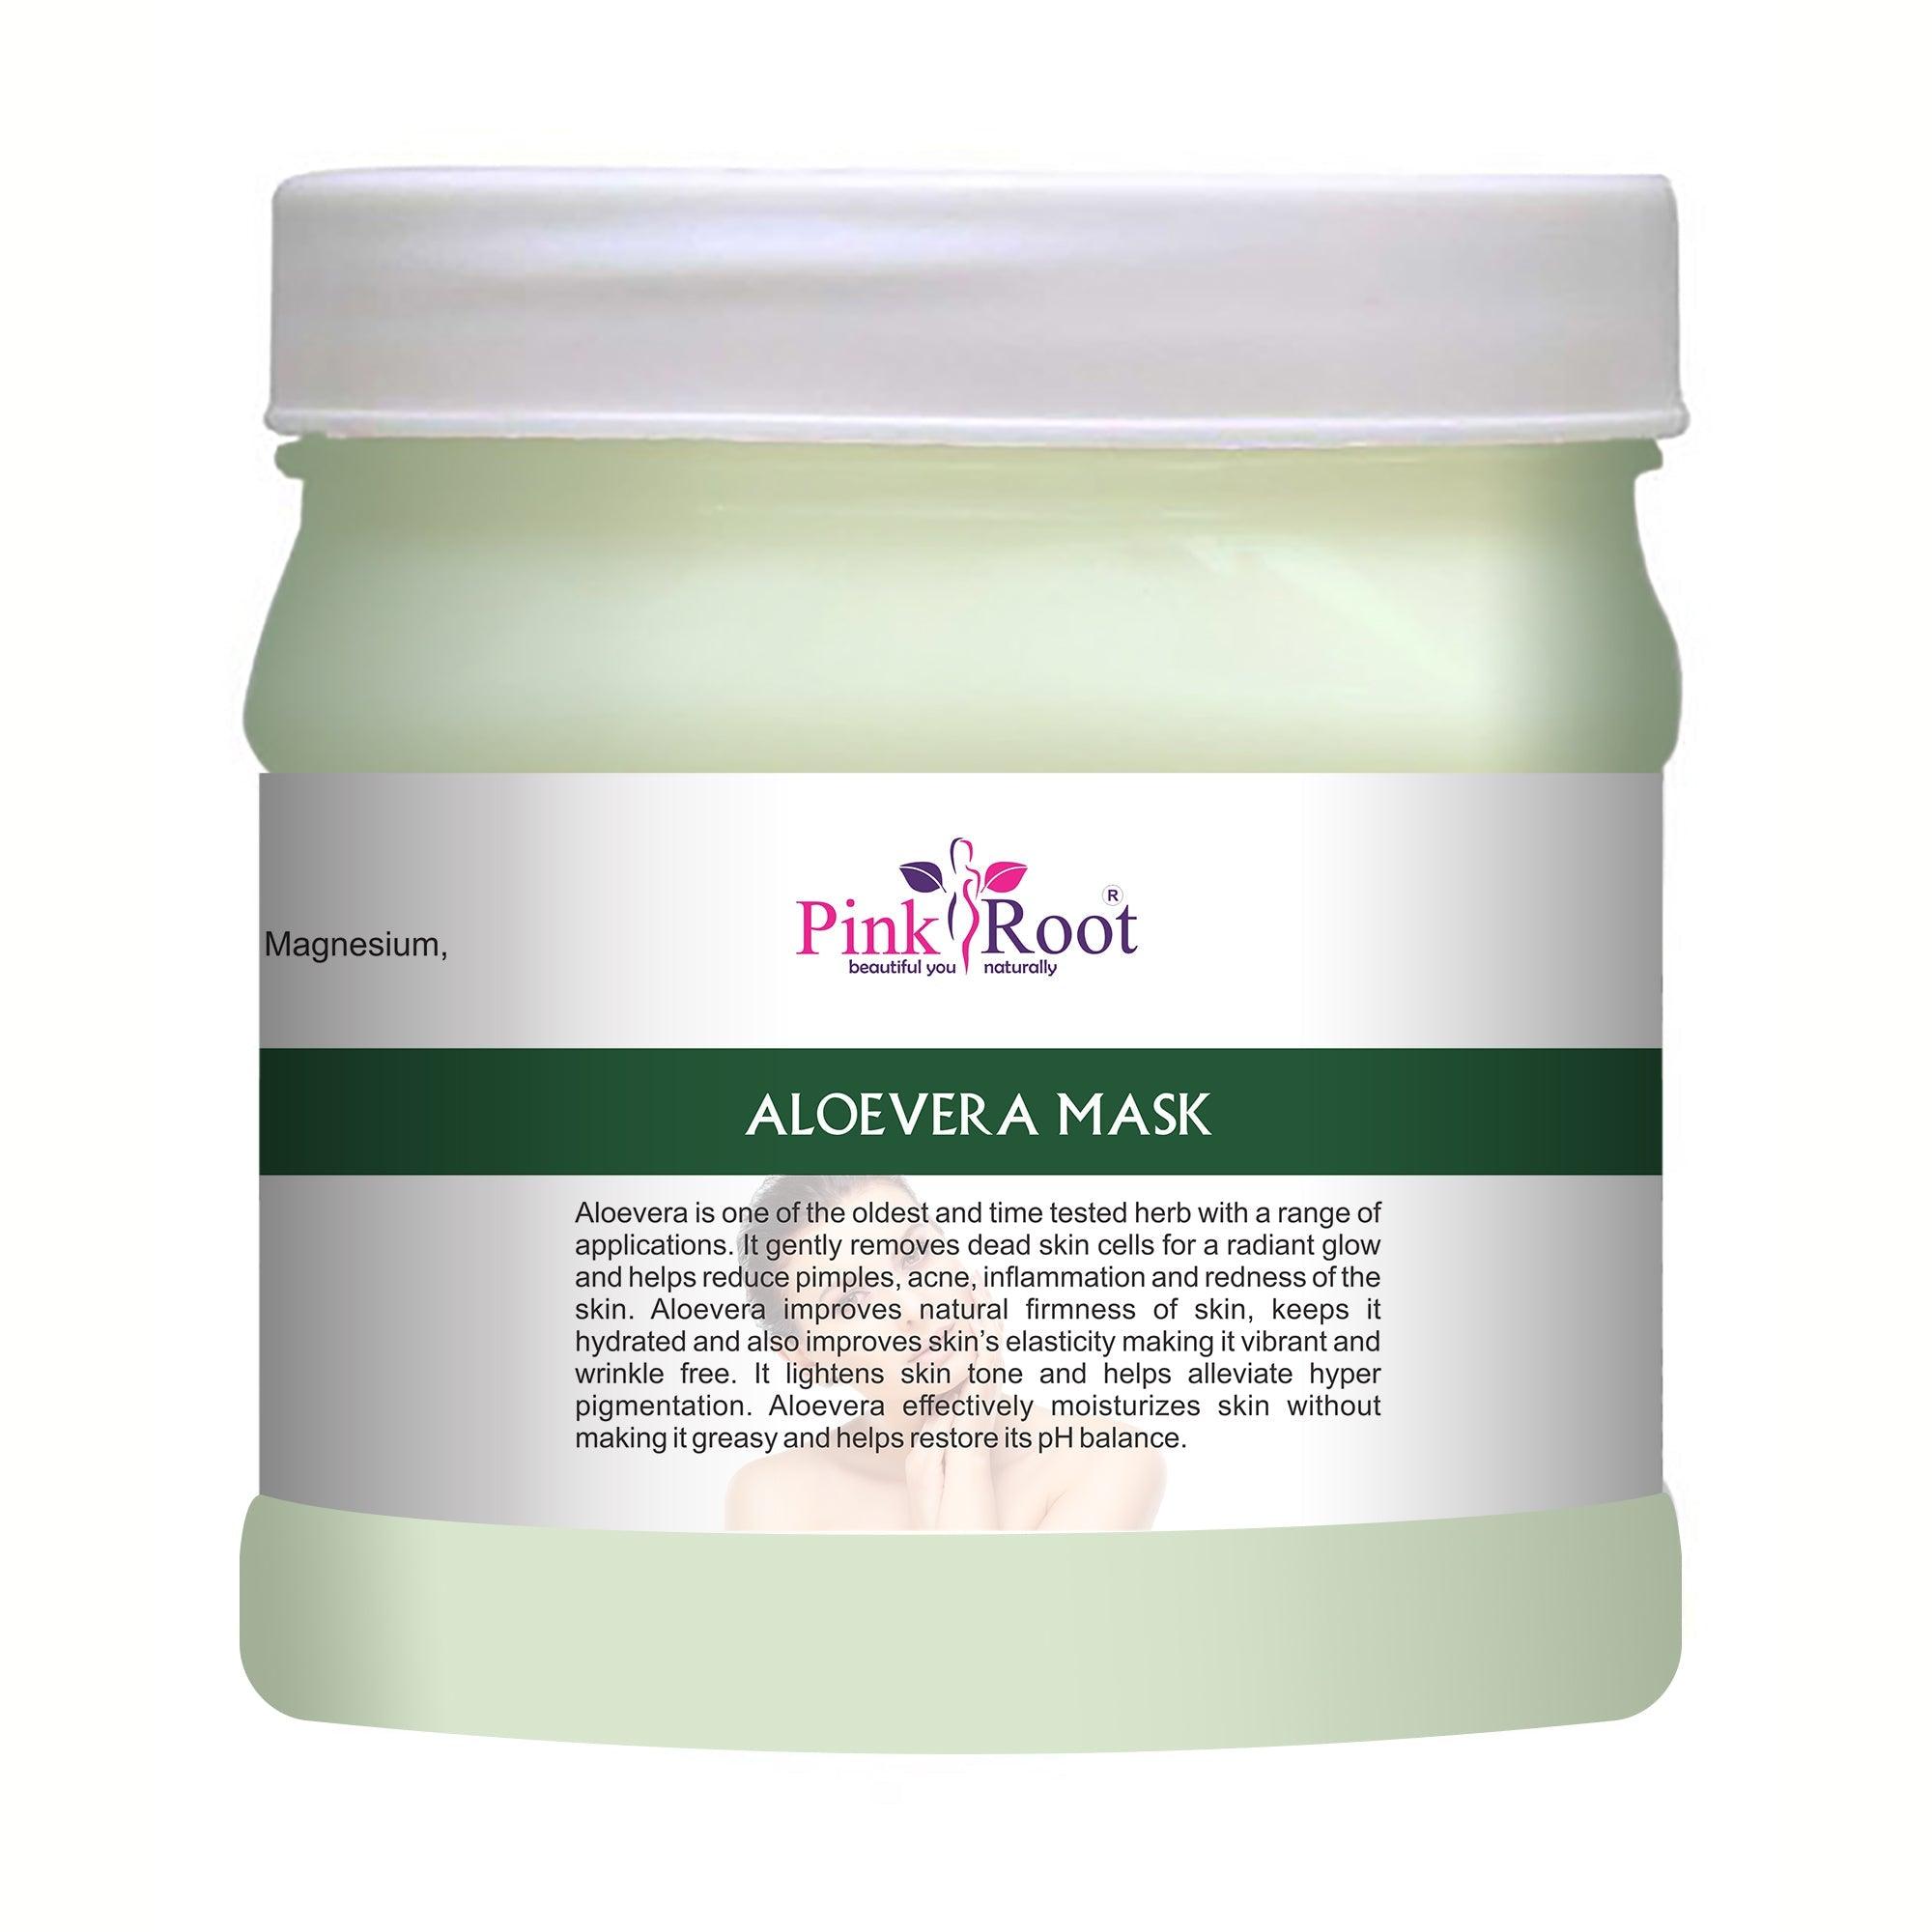 Aloevera Mask Enriched with Aloevera Extract and Vitamin E Oil 500gm - Pink Root